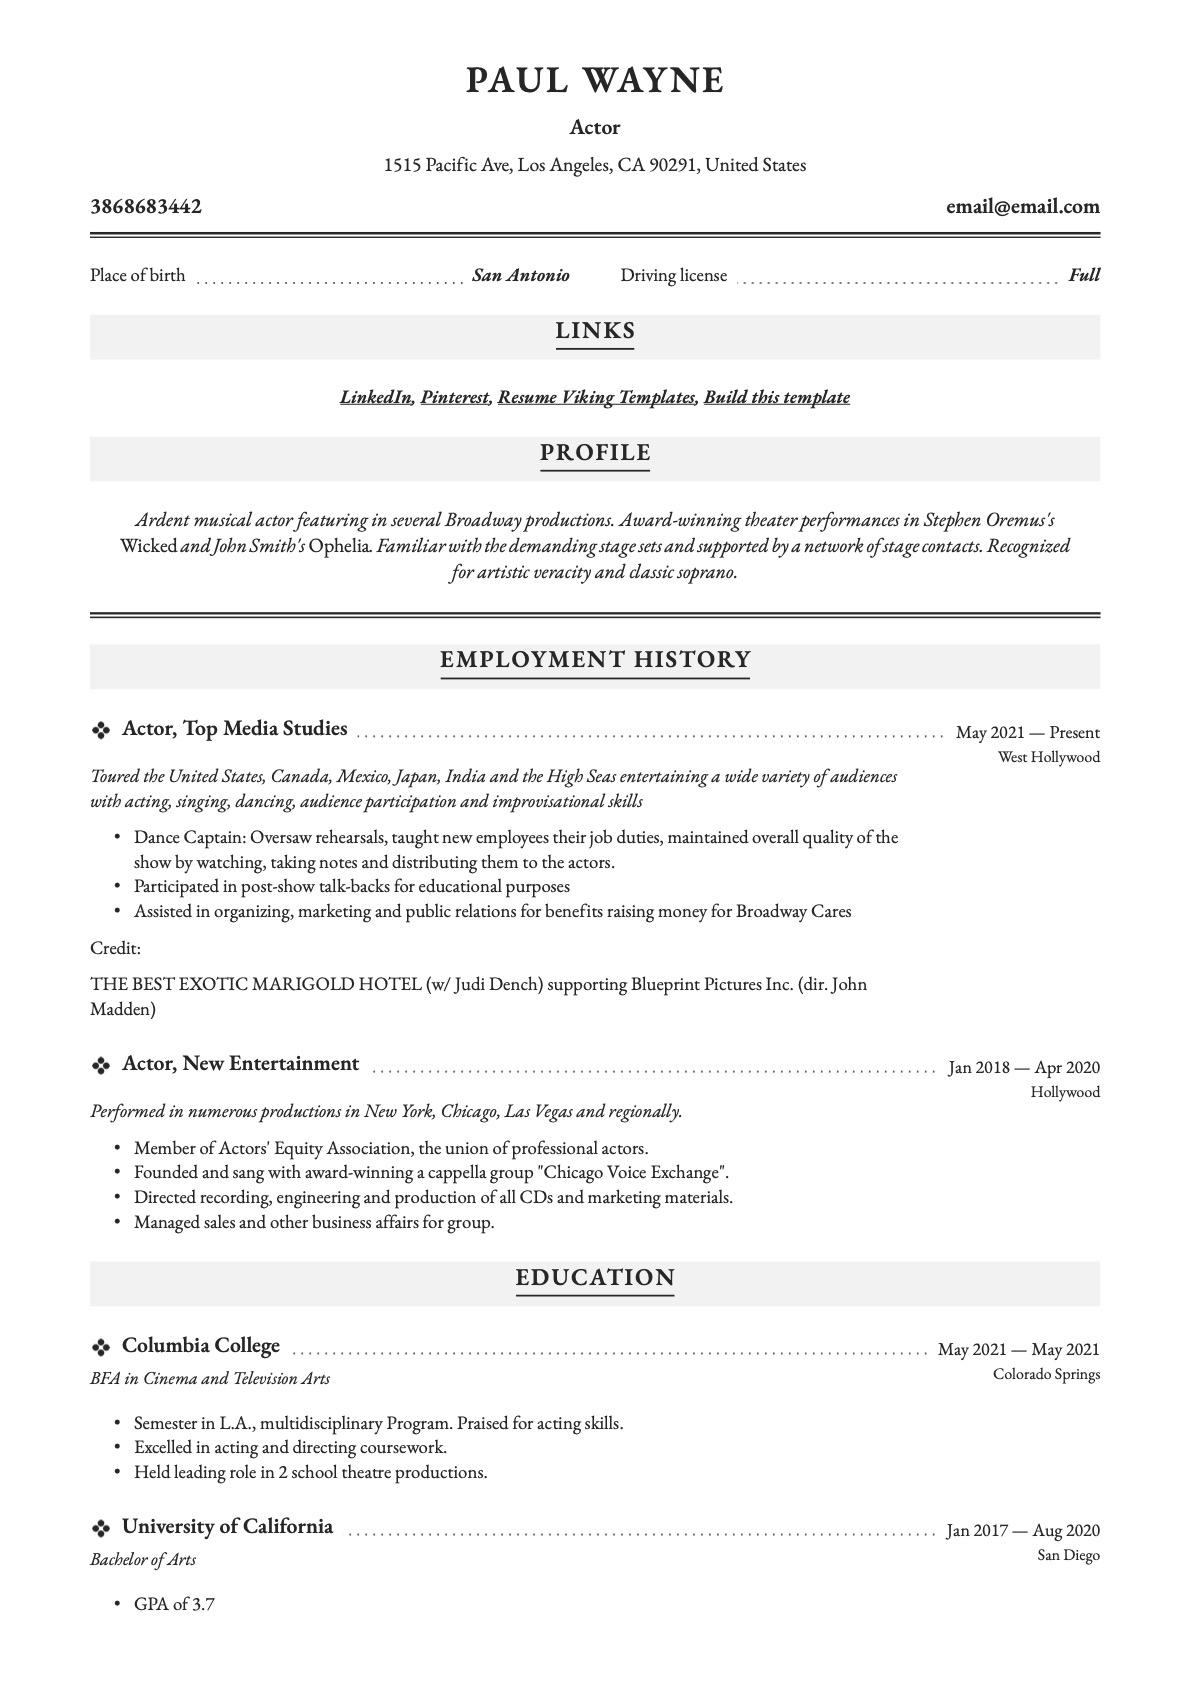 Professional Actor Resume Example